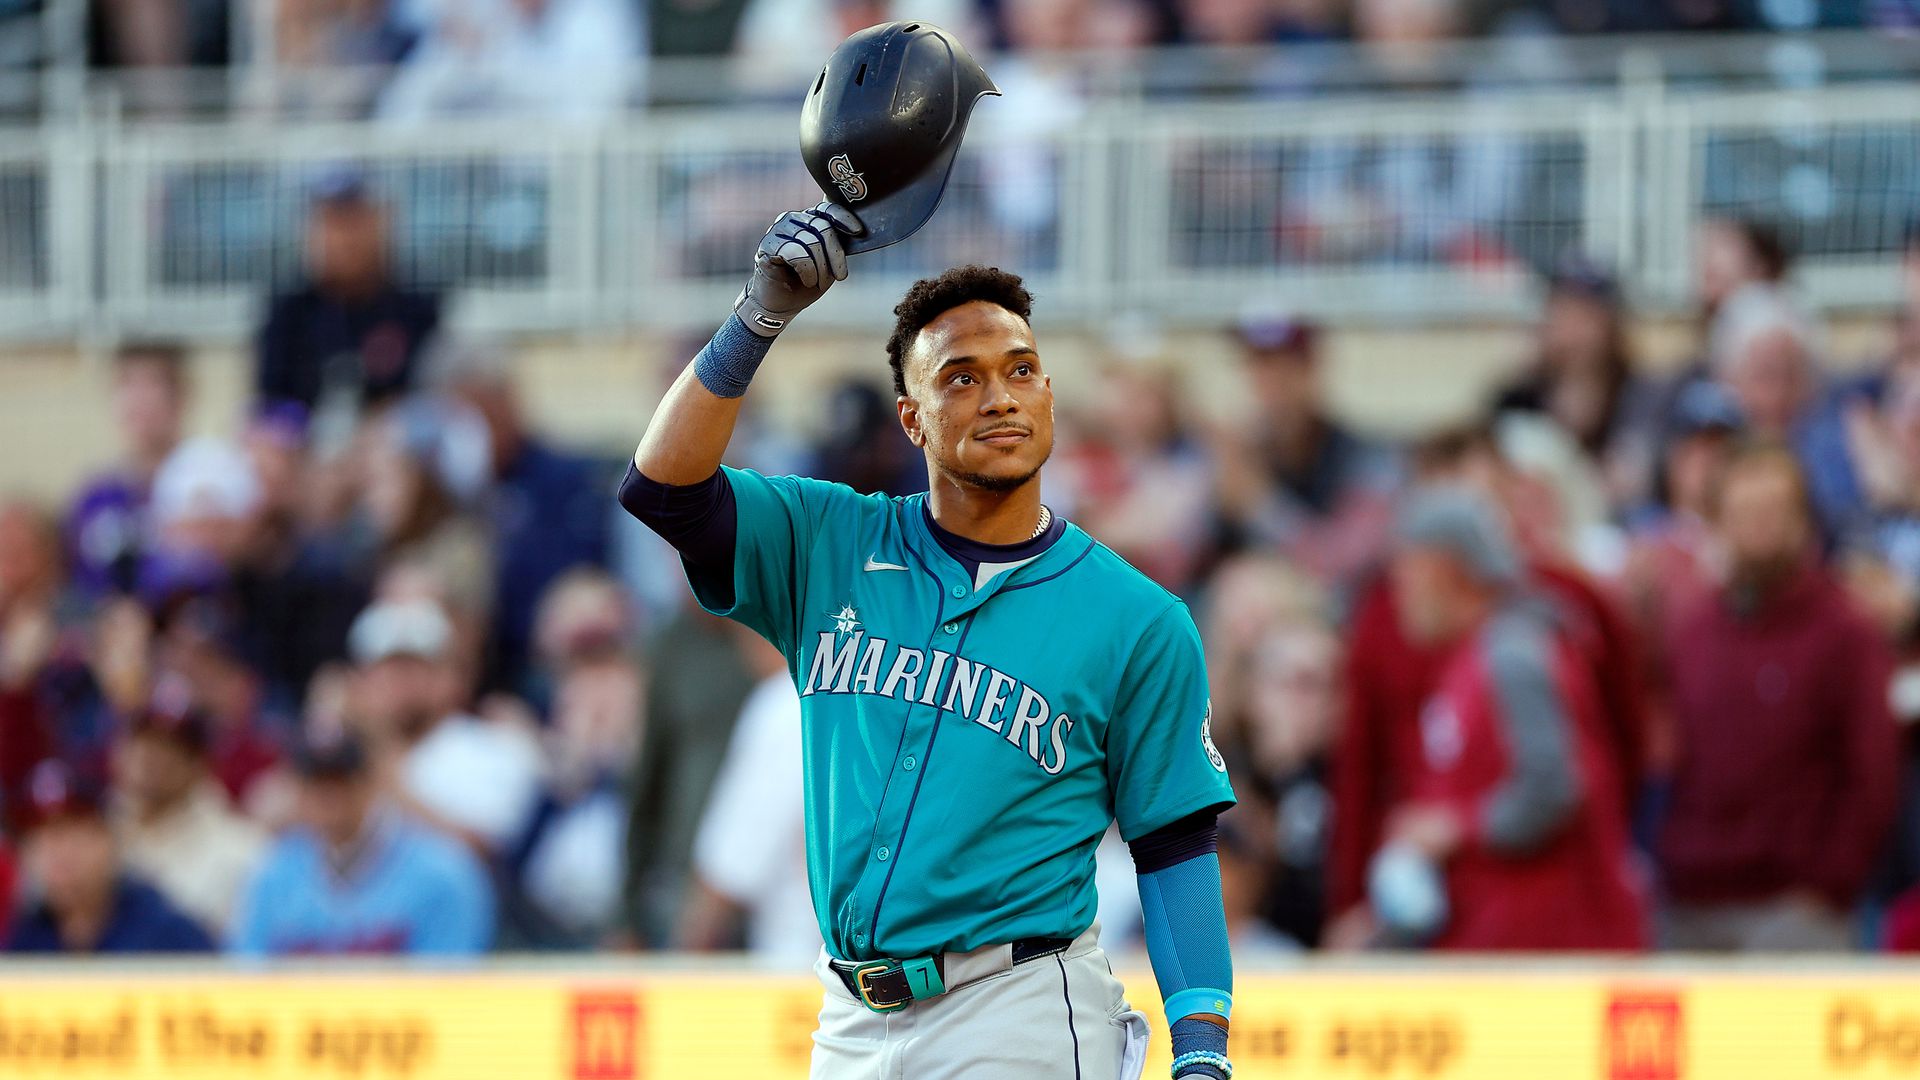 mariners do the right things the wrong way, lose to twins 3-1